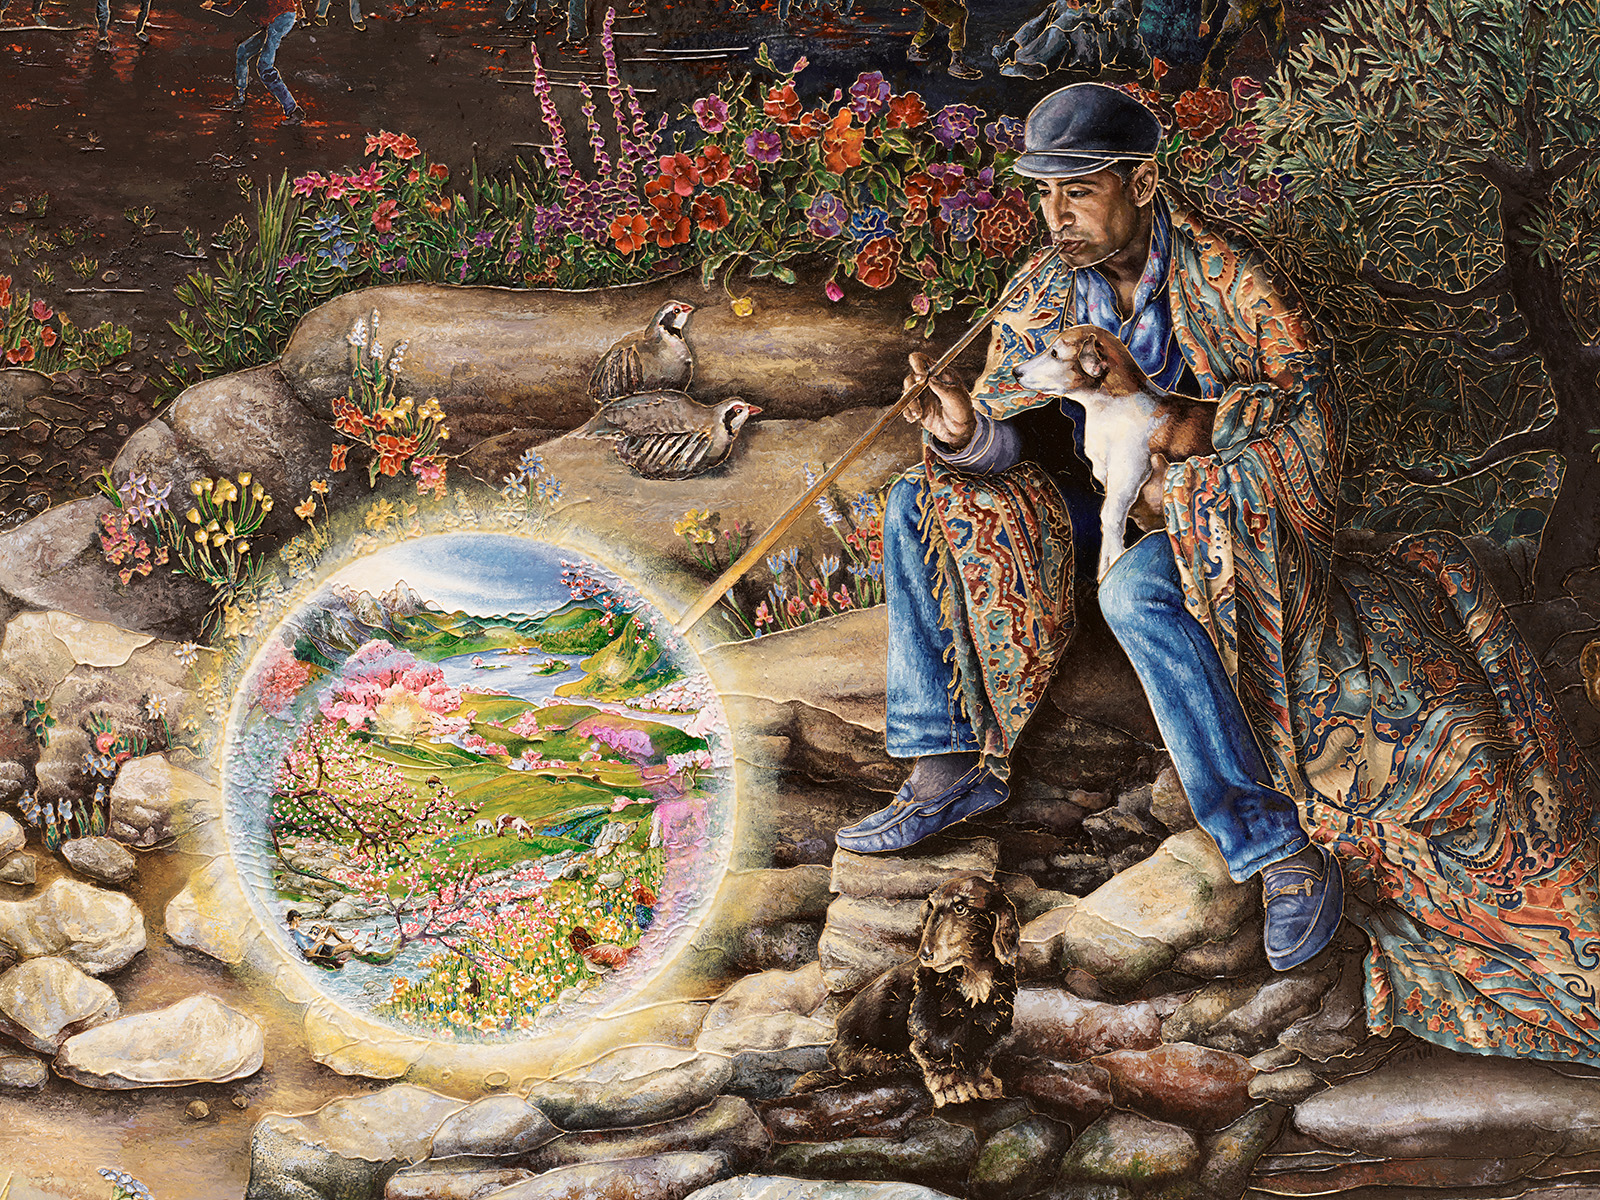 Man sitting outside with dog looking into a portal showing an idyllic landscape